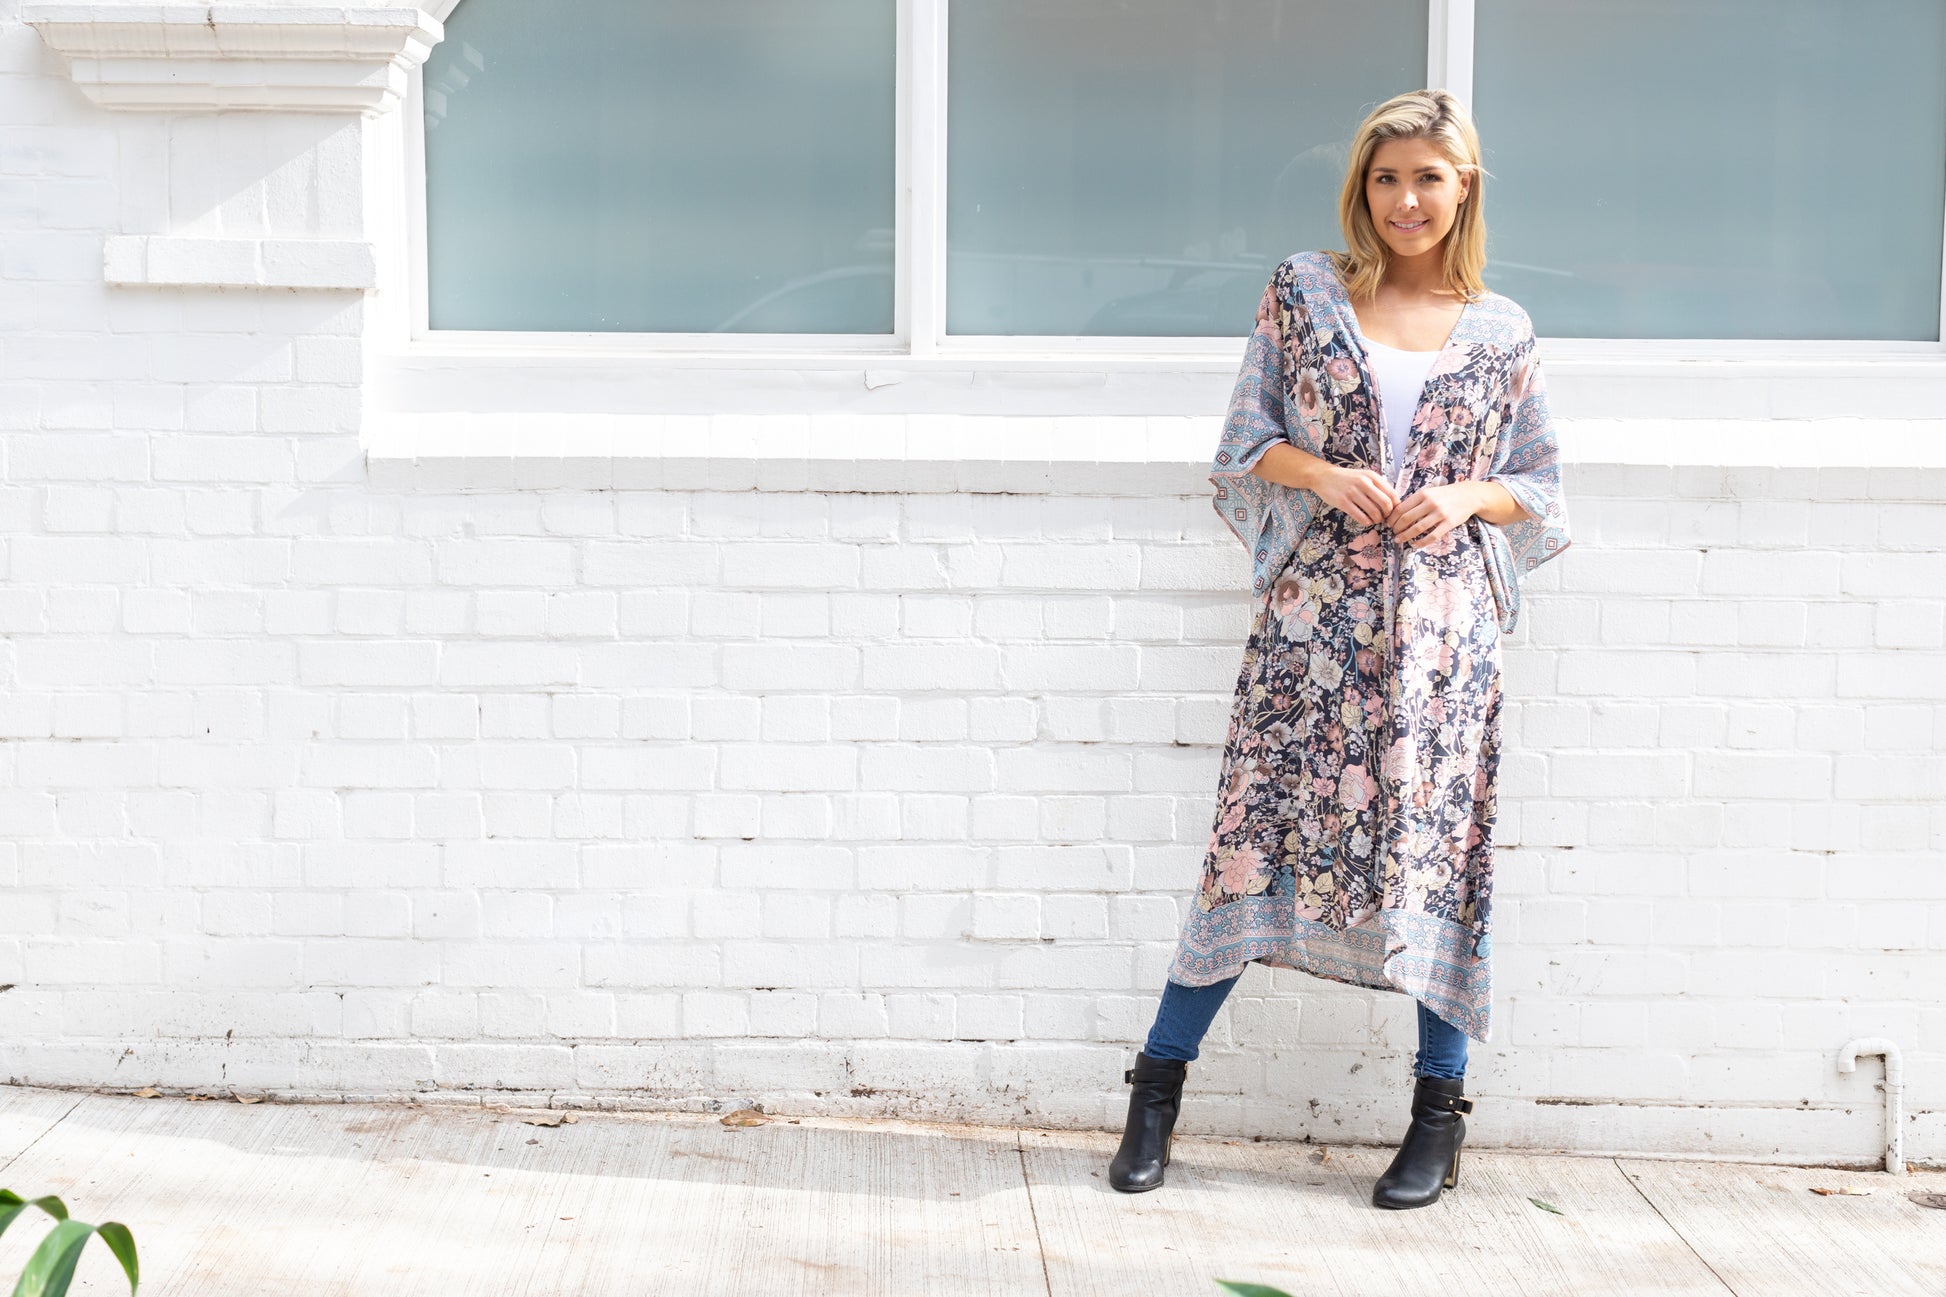 Boho Cape: A simple and easy way to brighten up the most basic of outfits - chuck on and go! These gorgeous Boho Cape's come in a range of eye-catching prints to level up your  - Ciao Bella Dresses